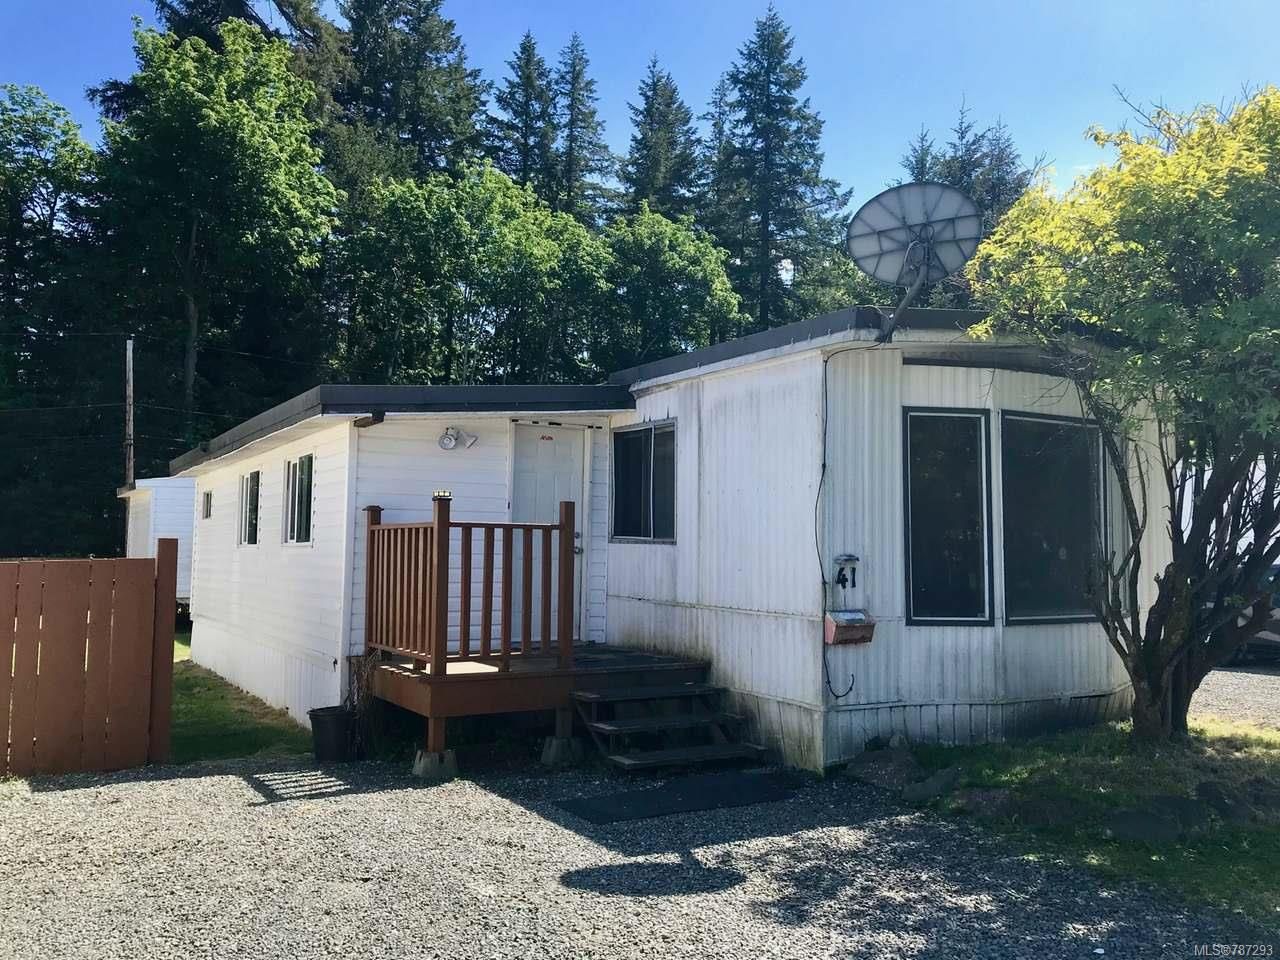 Main Photo: 41 2700 Woodburn Rd in CAMPBELL RIVER: CR Campbell River North Manufactured Home for sale (Campbell River)  : MLS®# 787293